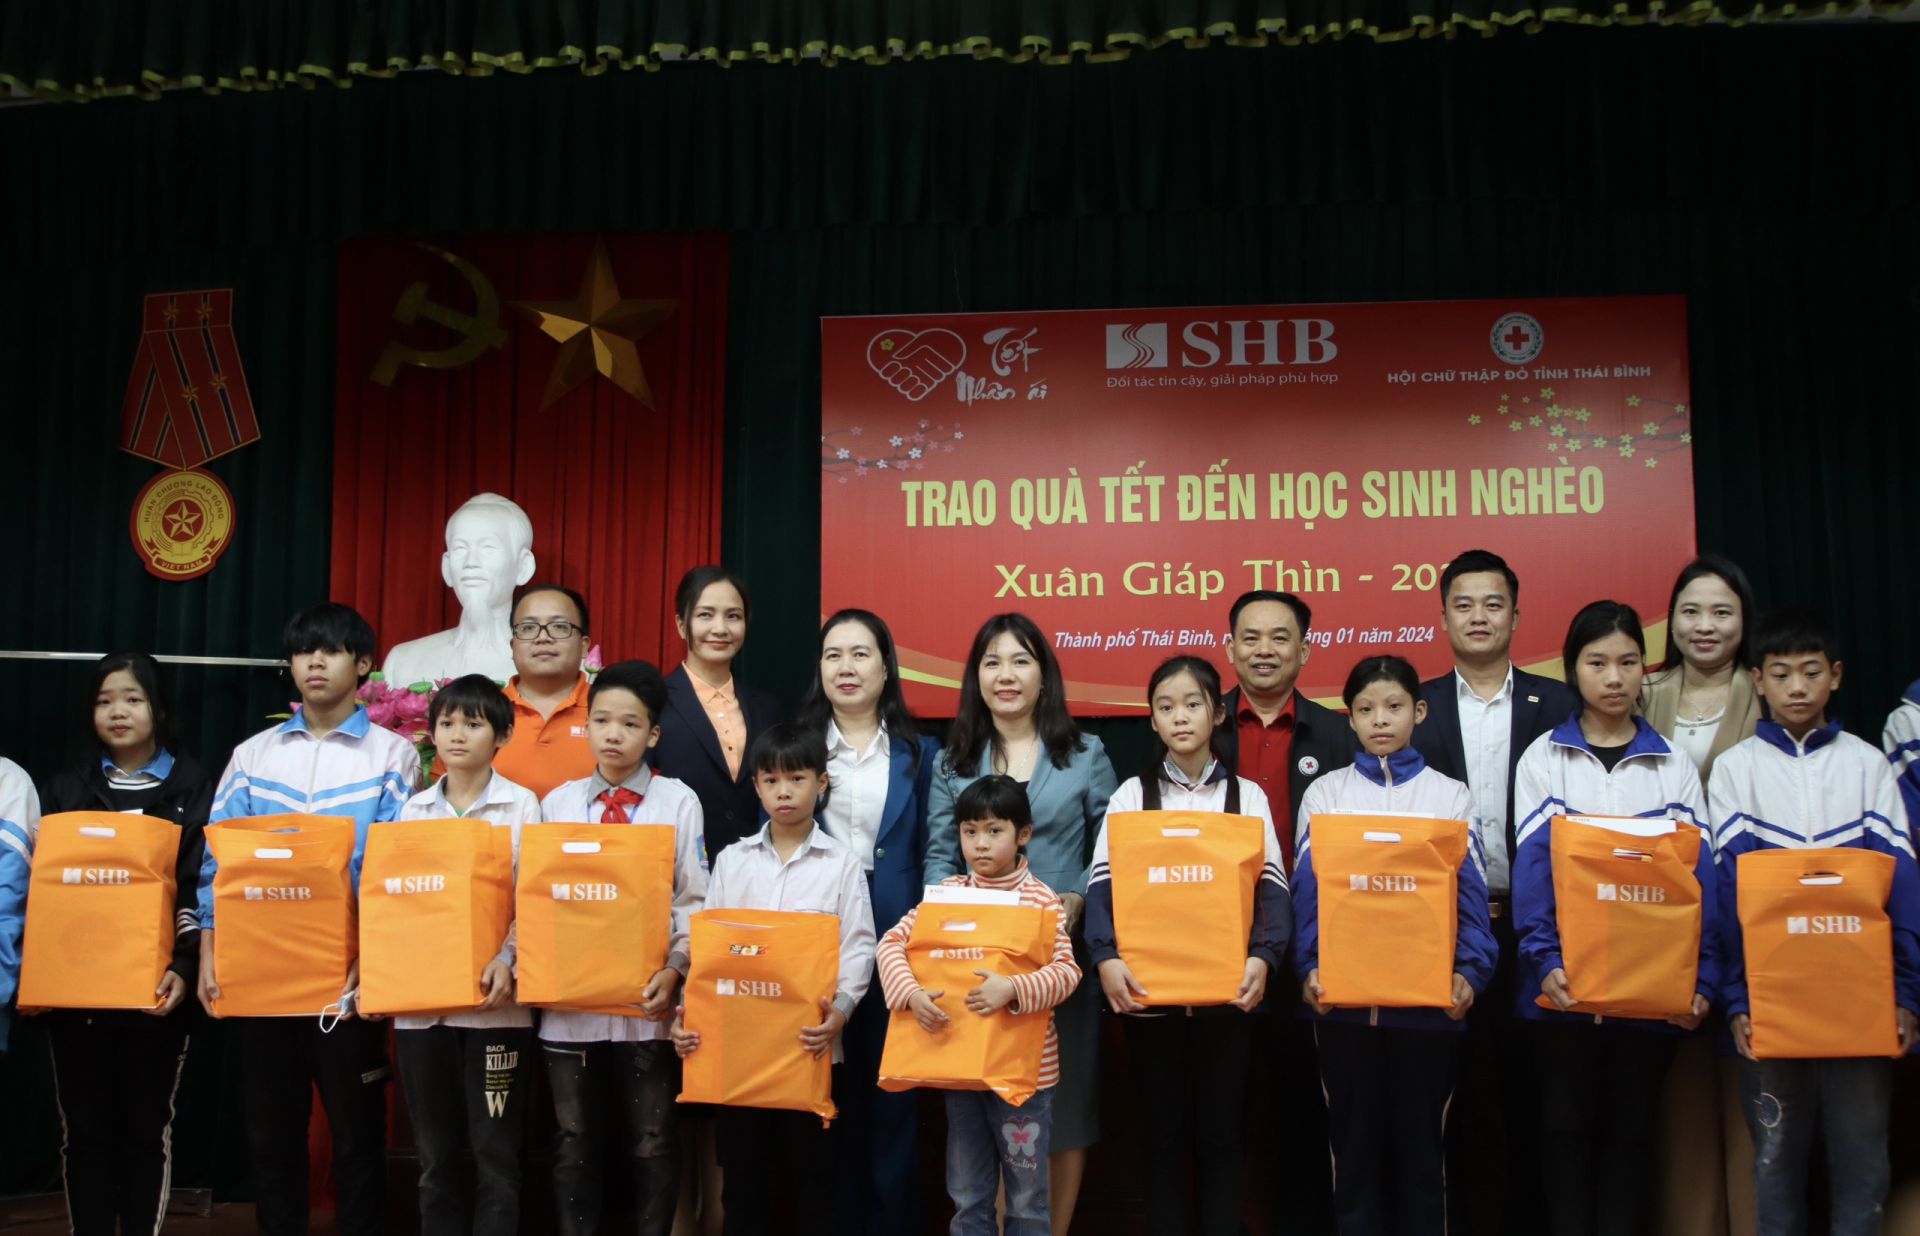 Originating from the Heart, SHB Bank brings practical gifts to share difficulties with the children in time for the upcoming Tet holiday